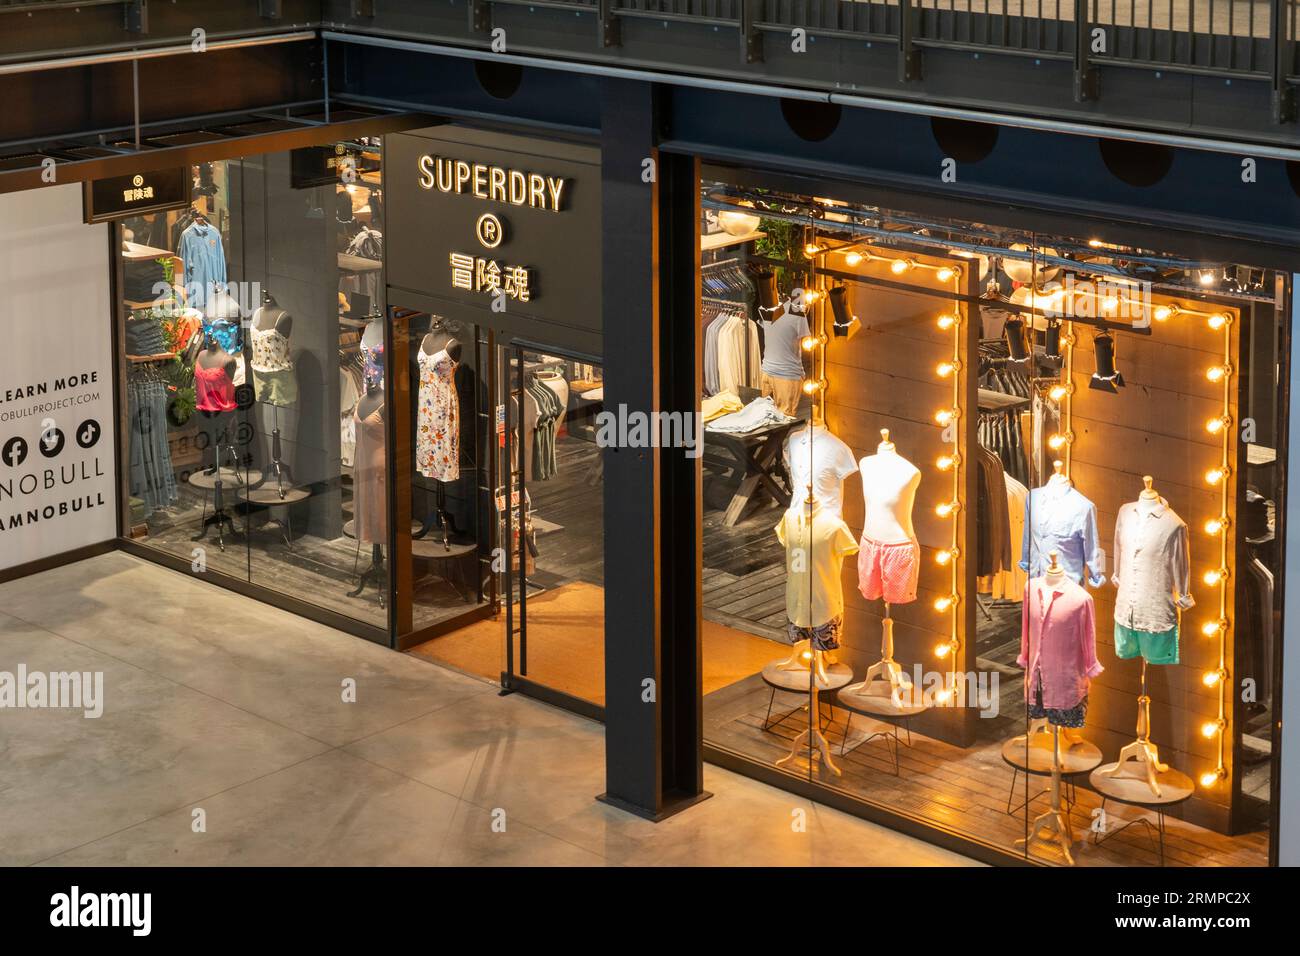 Superdry clothing store in the boiler house north section of the refurbished Battersea Power Station site, now a shopping centre. London, England Stock Photo